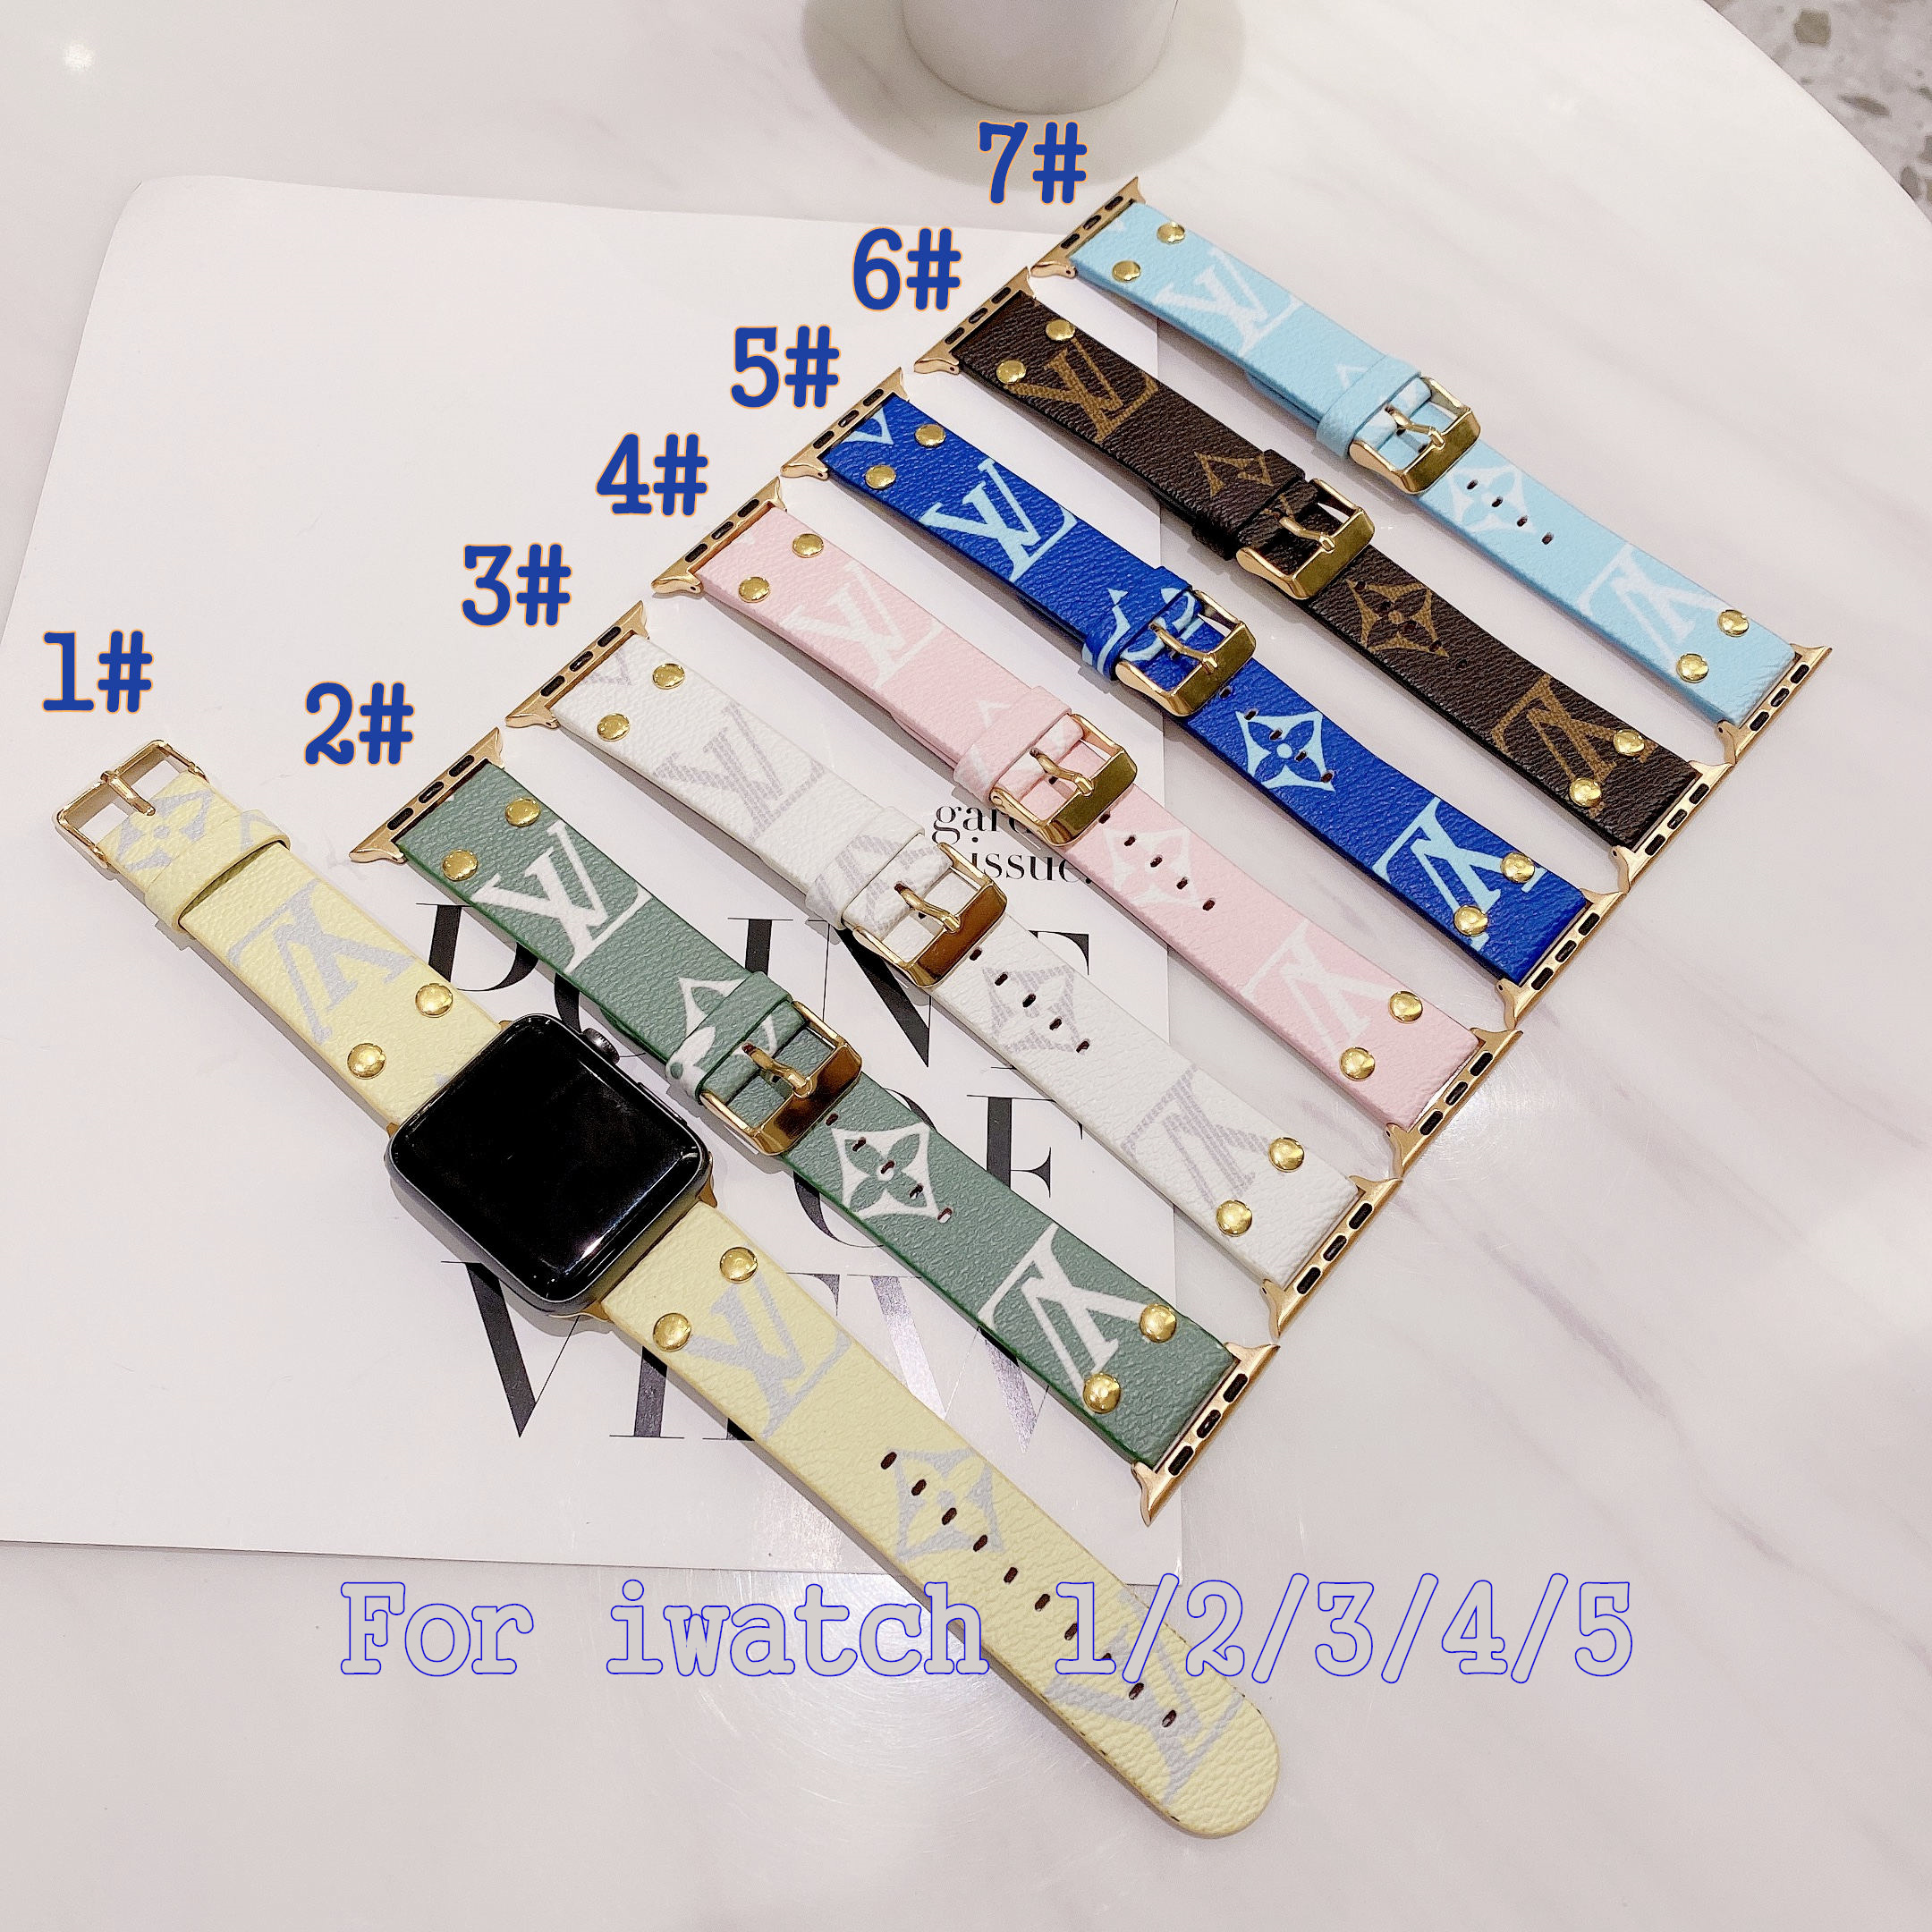 iwatch Leather Strap For Apple Watch Series 1/2/3/4/5 Leather Strap For 38mm/42mm/40mm/44mm Watch Band